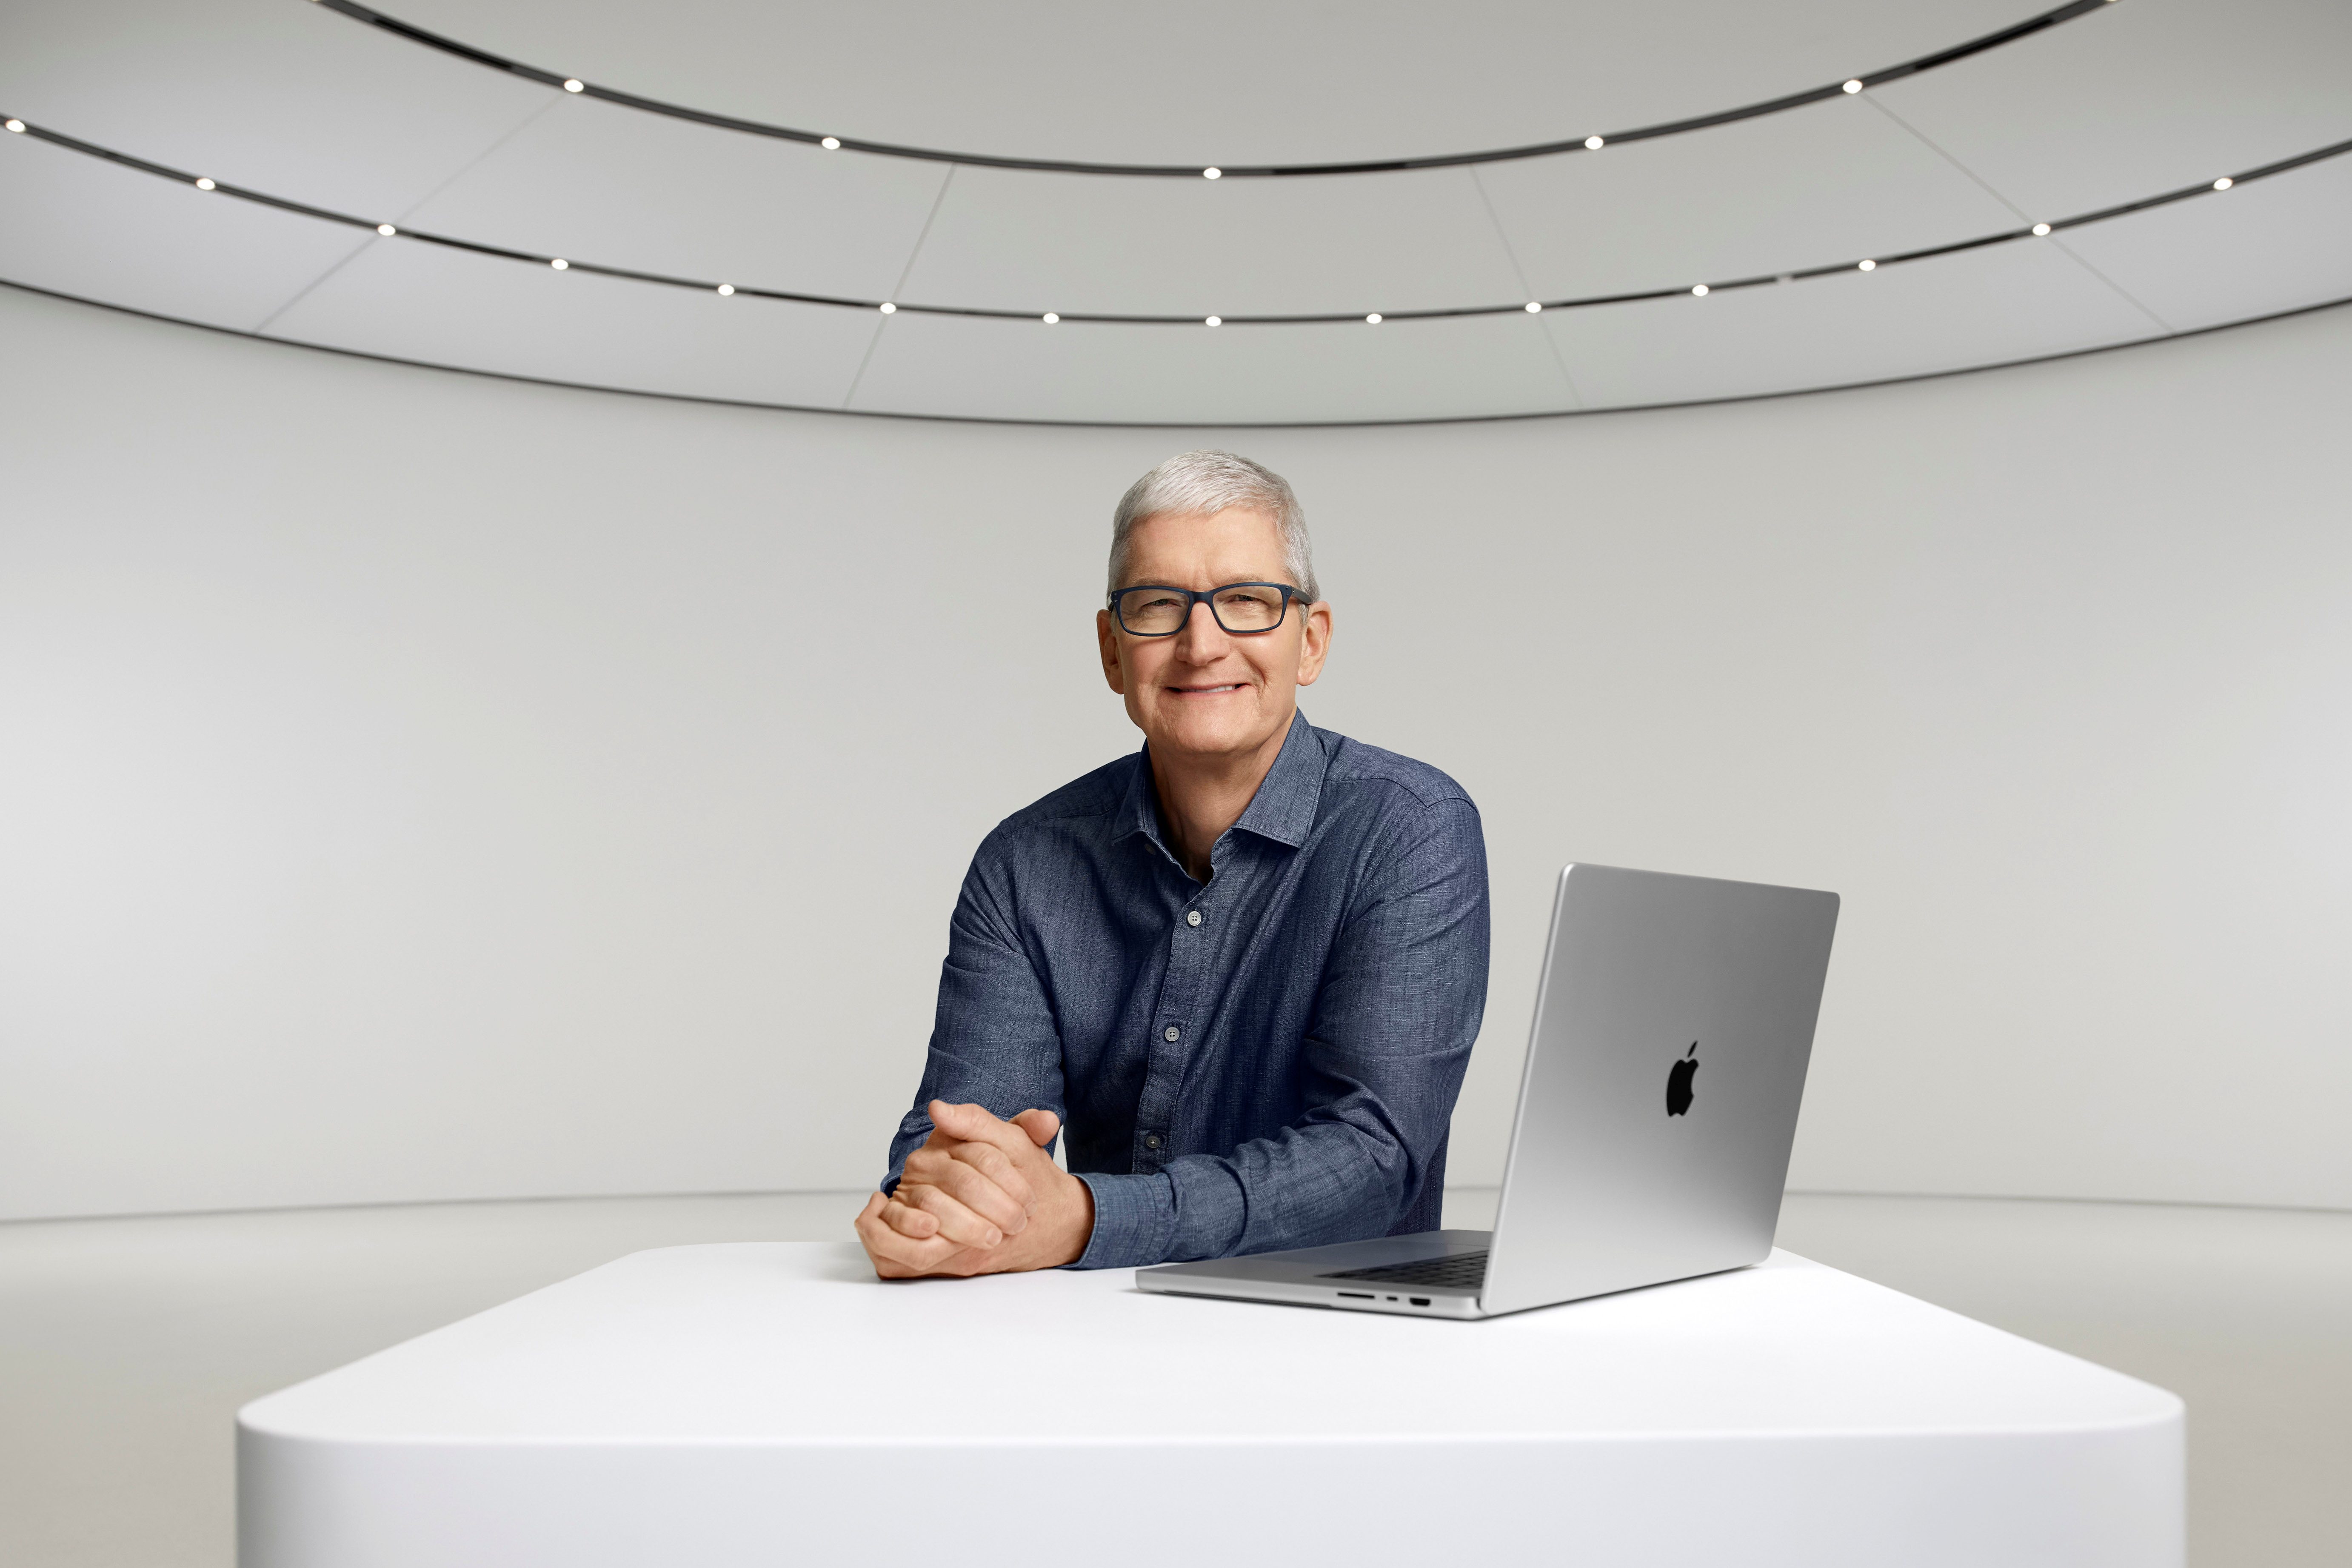 Apple doubles down on chip strategy with new premium-priced MacBooks